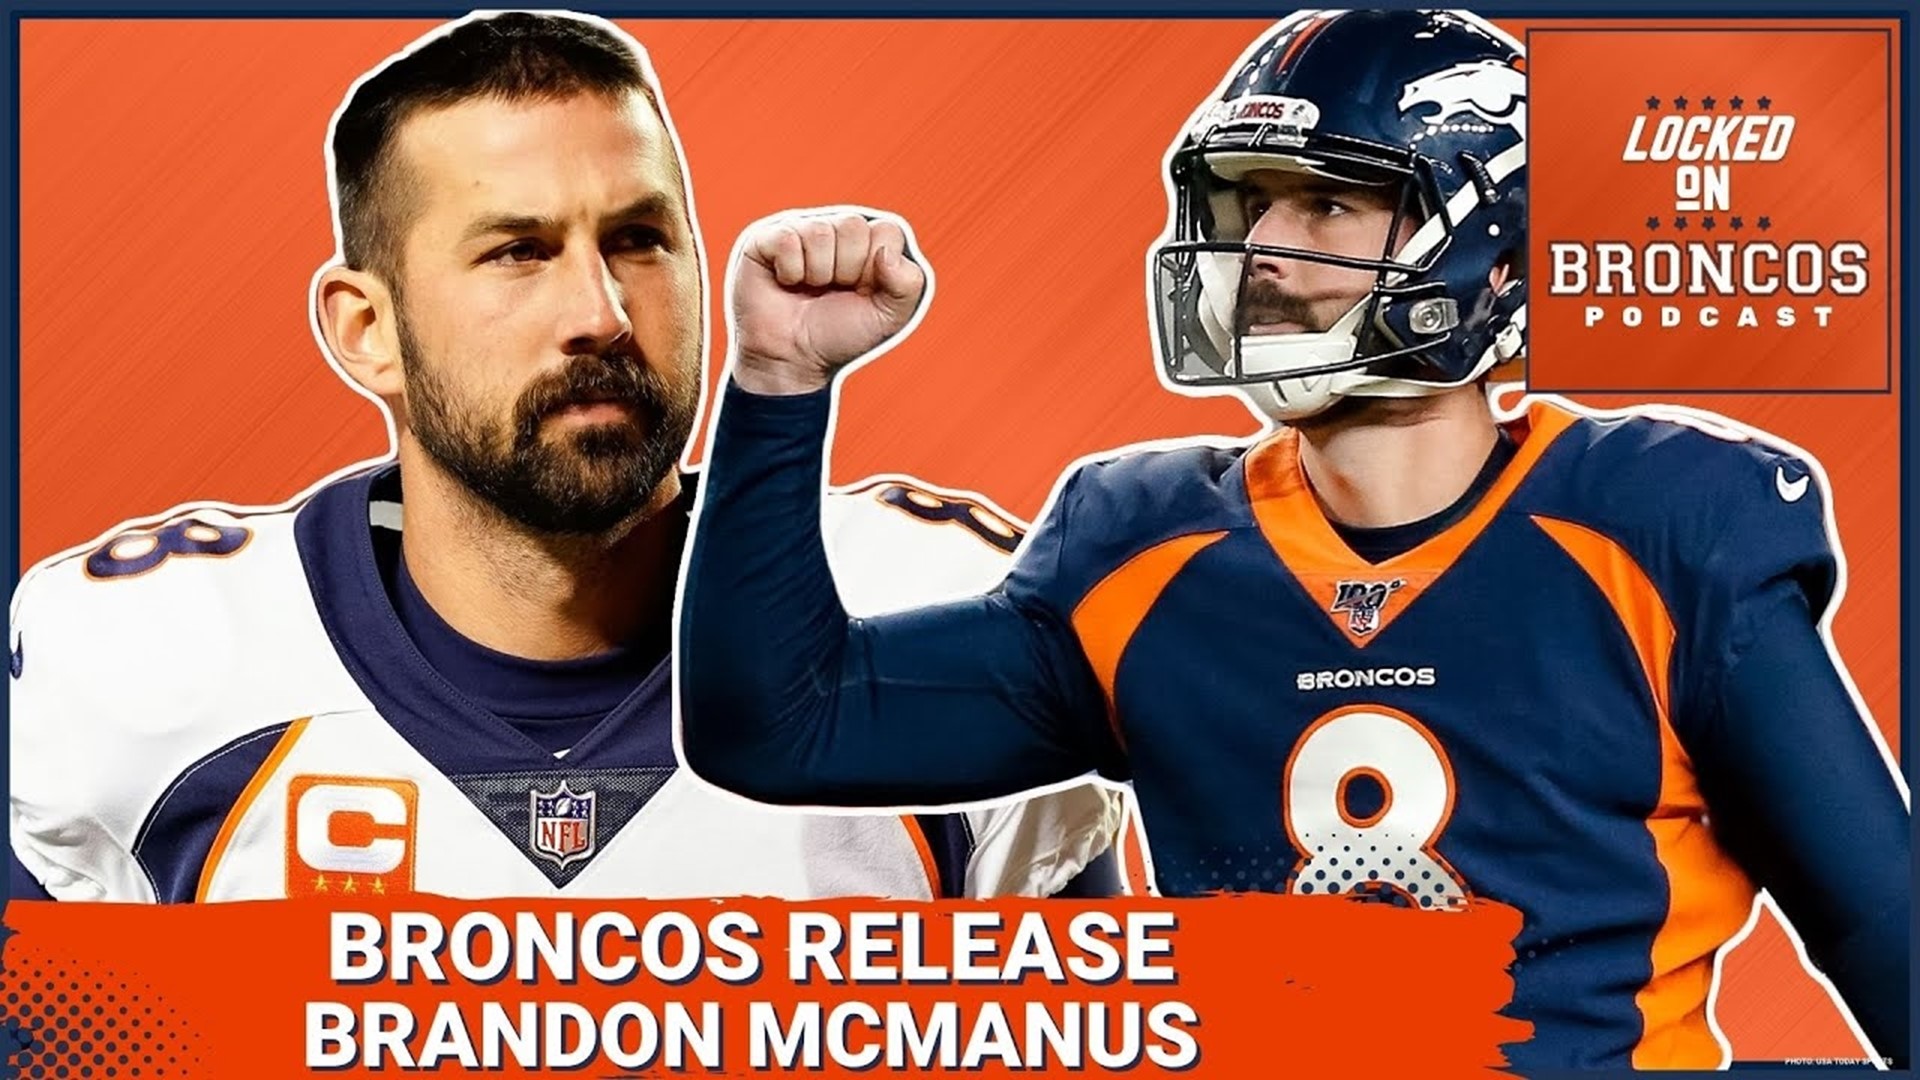 The Denver Broncos OTAs have officially began with the team releasing kicker Brandon McManus. Why is it surprising that the Broncos released McManus at this point of